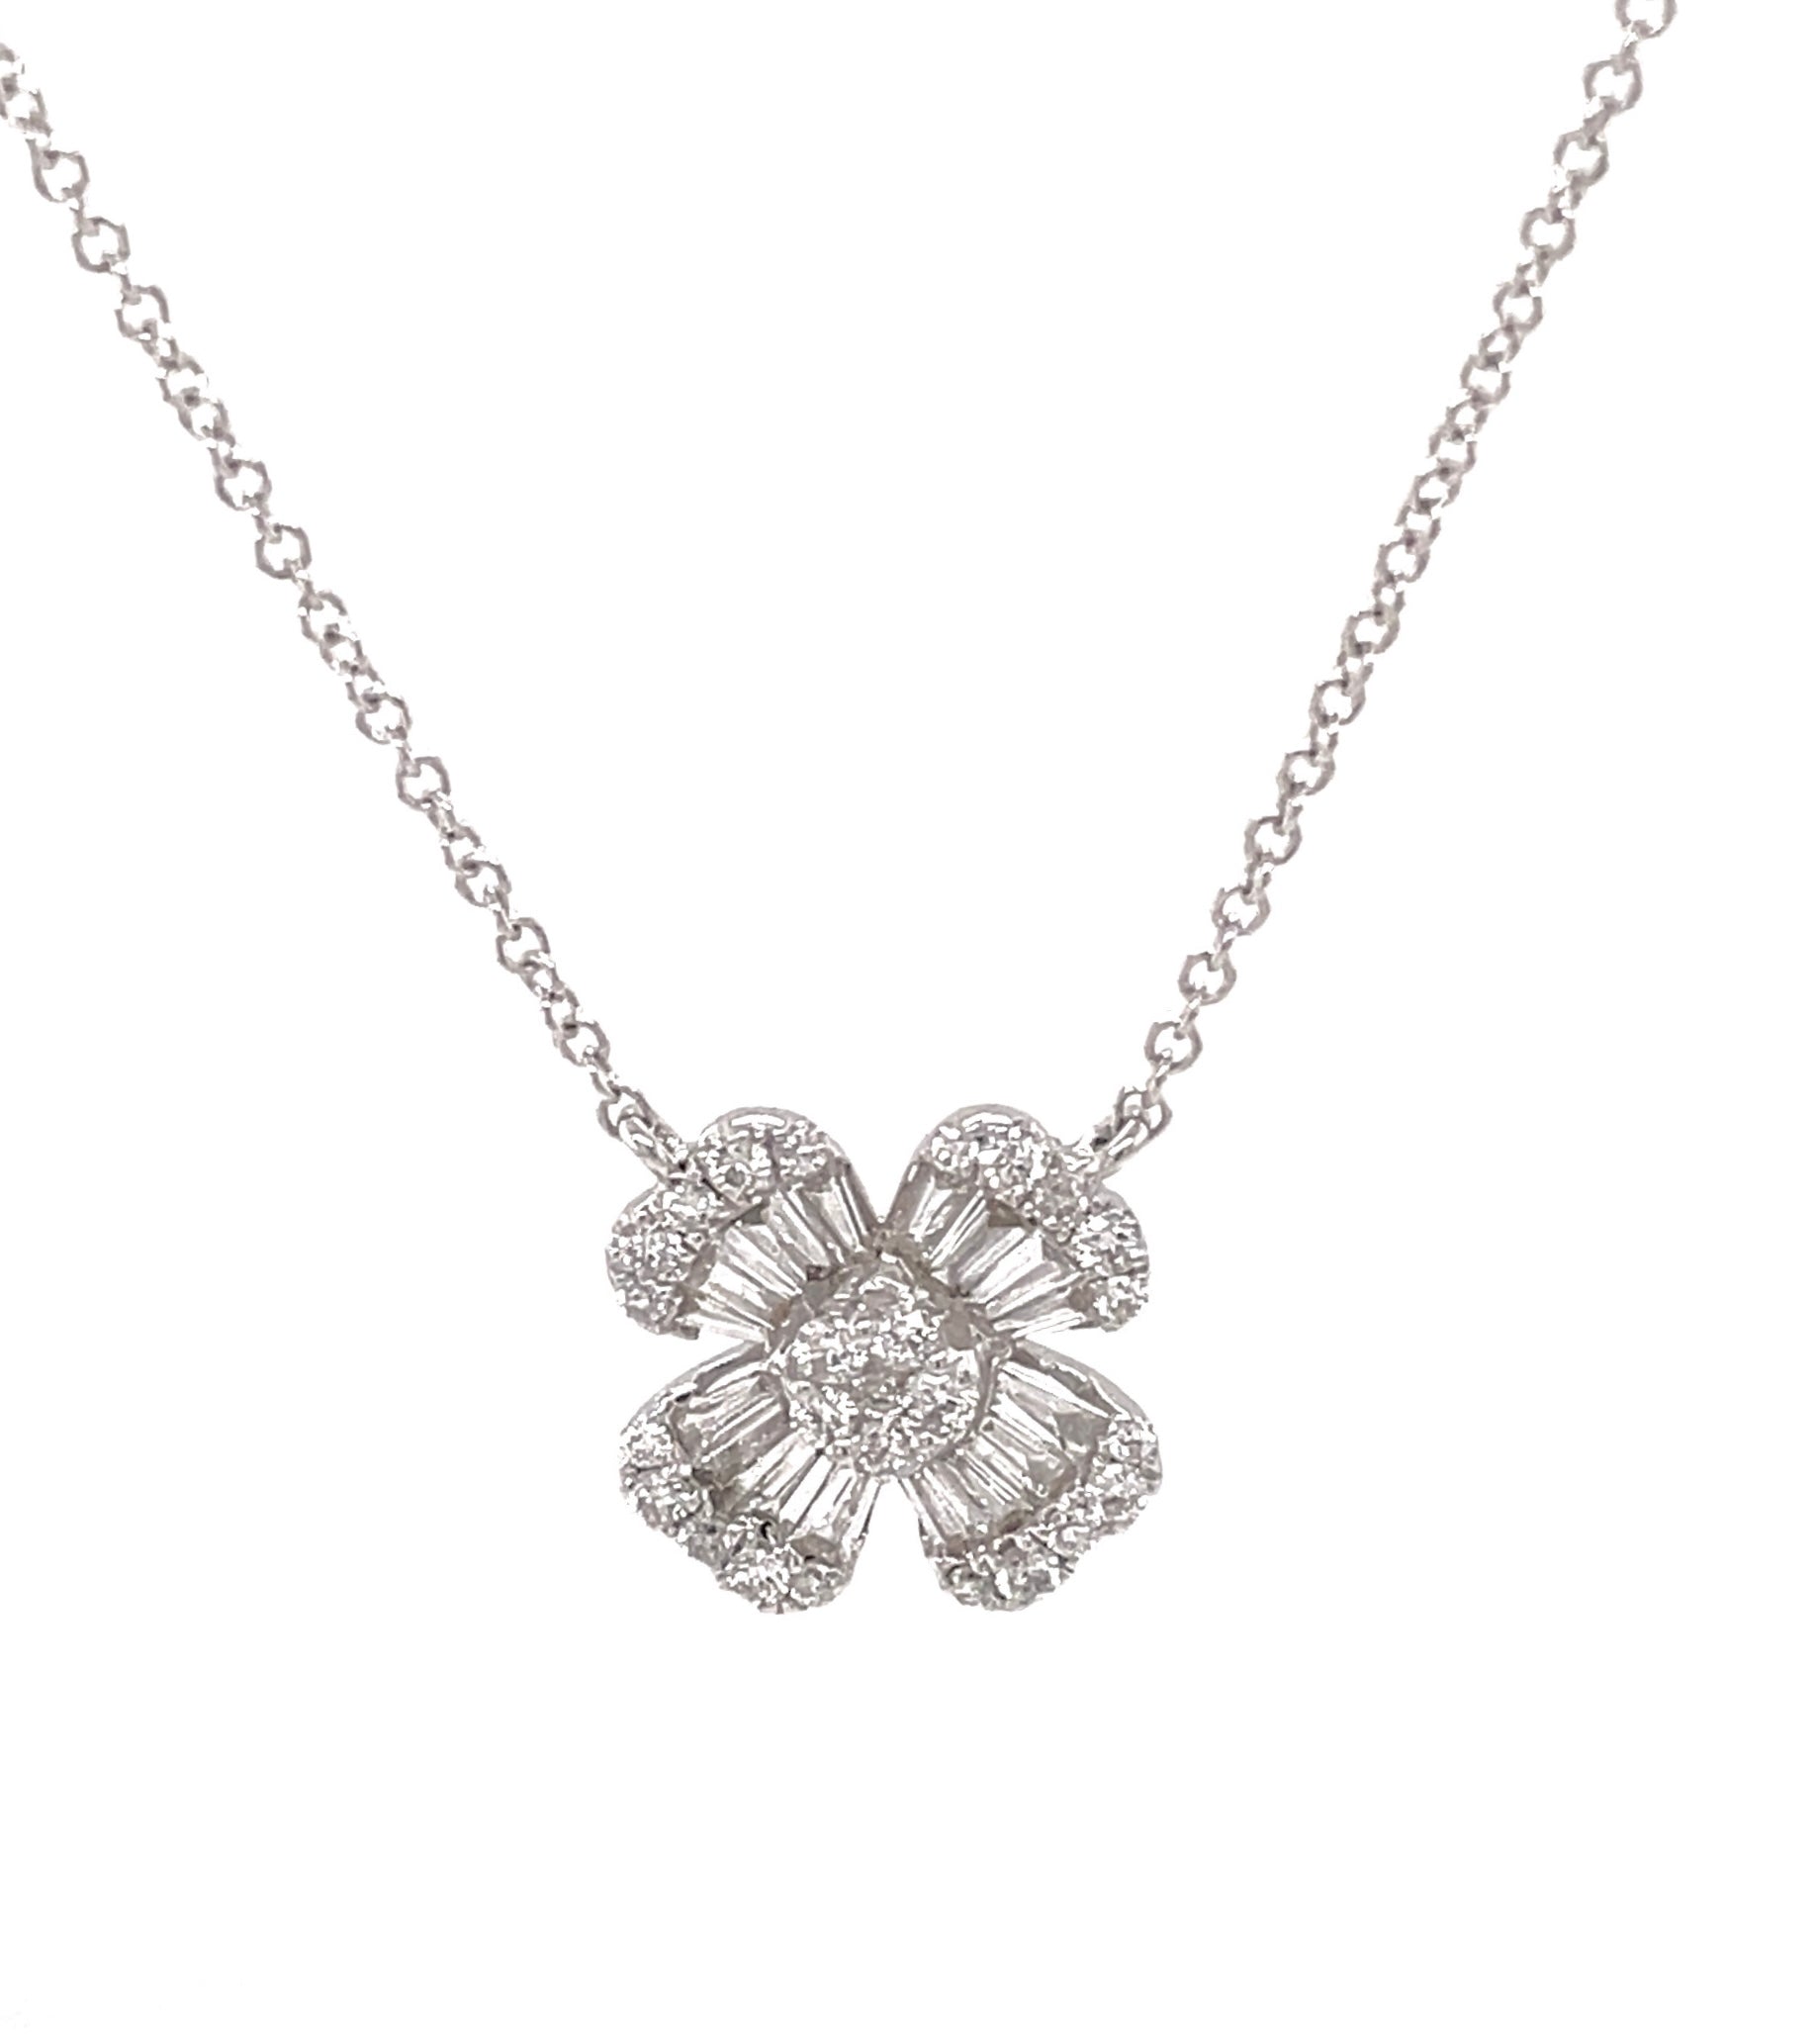 This stylish design is crafted in 14k white gold and features 0.98 carats of round and baguette diamonds for extra sparkle. Hangs from an 18-inch, 1.1 mm wide white gold chain with sizing loop. The pendant measures at 12.90 mm long, making it the perfect accessory for any outfit.